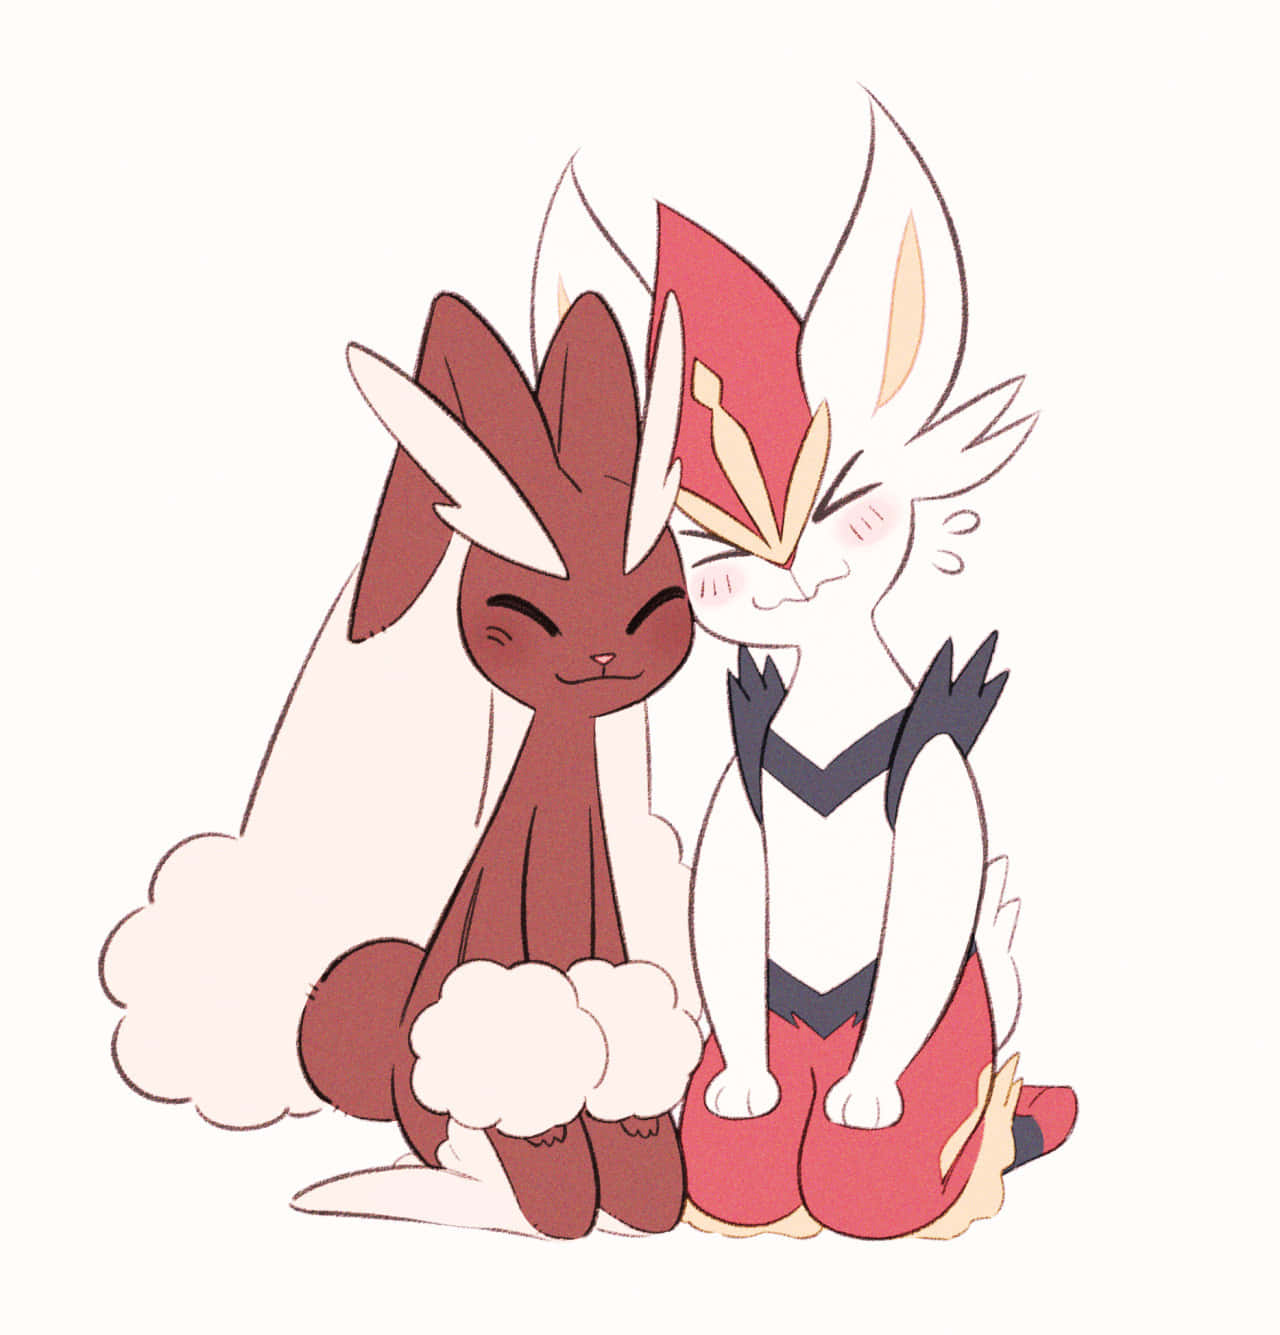 Affectionate Lopunny and Cinderace Pokémon in an Enchanting Illustration Wallpaper